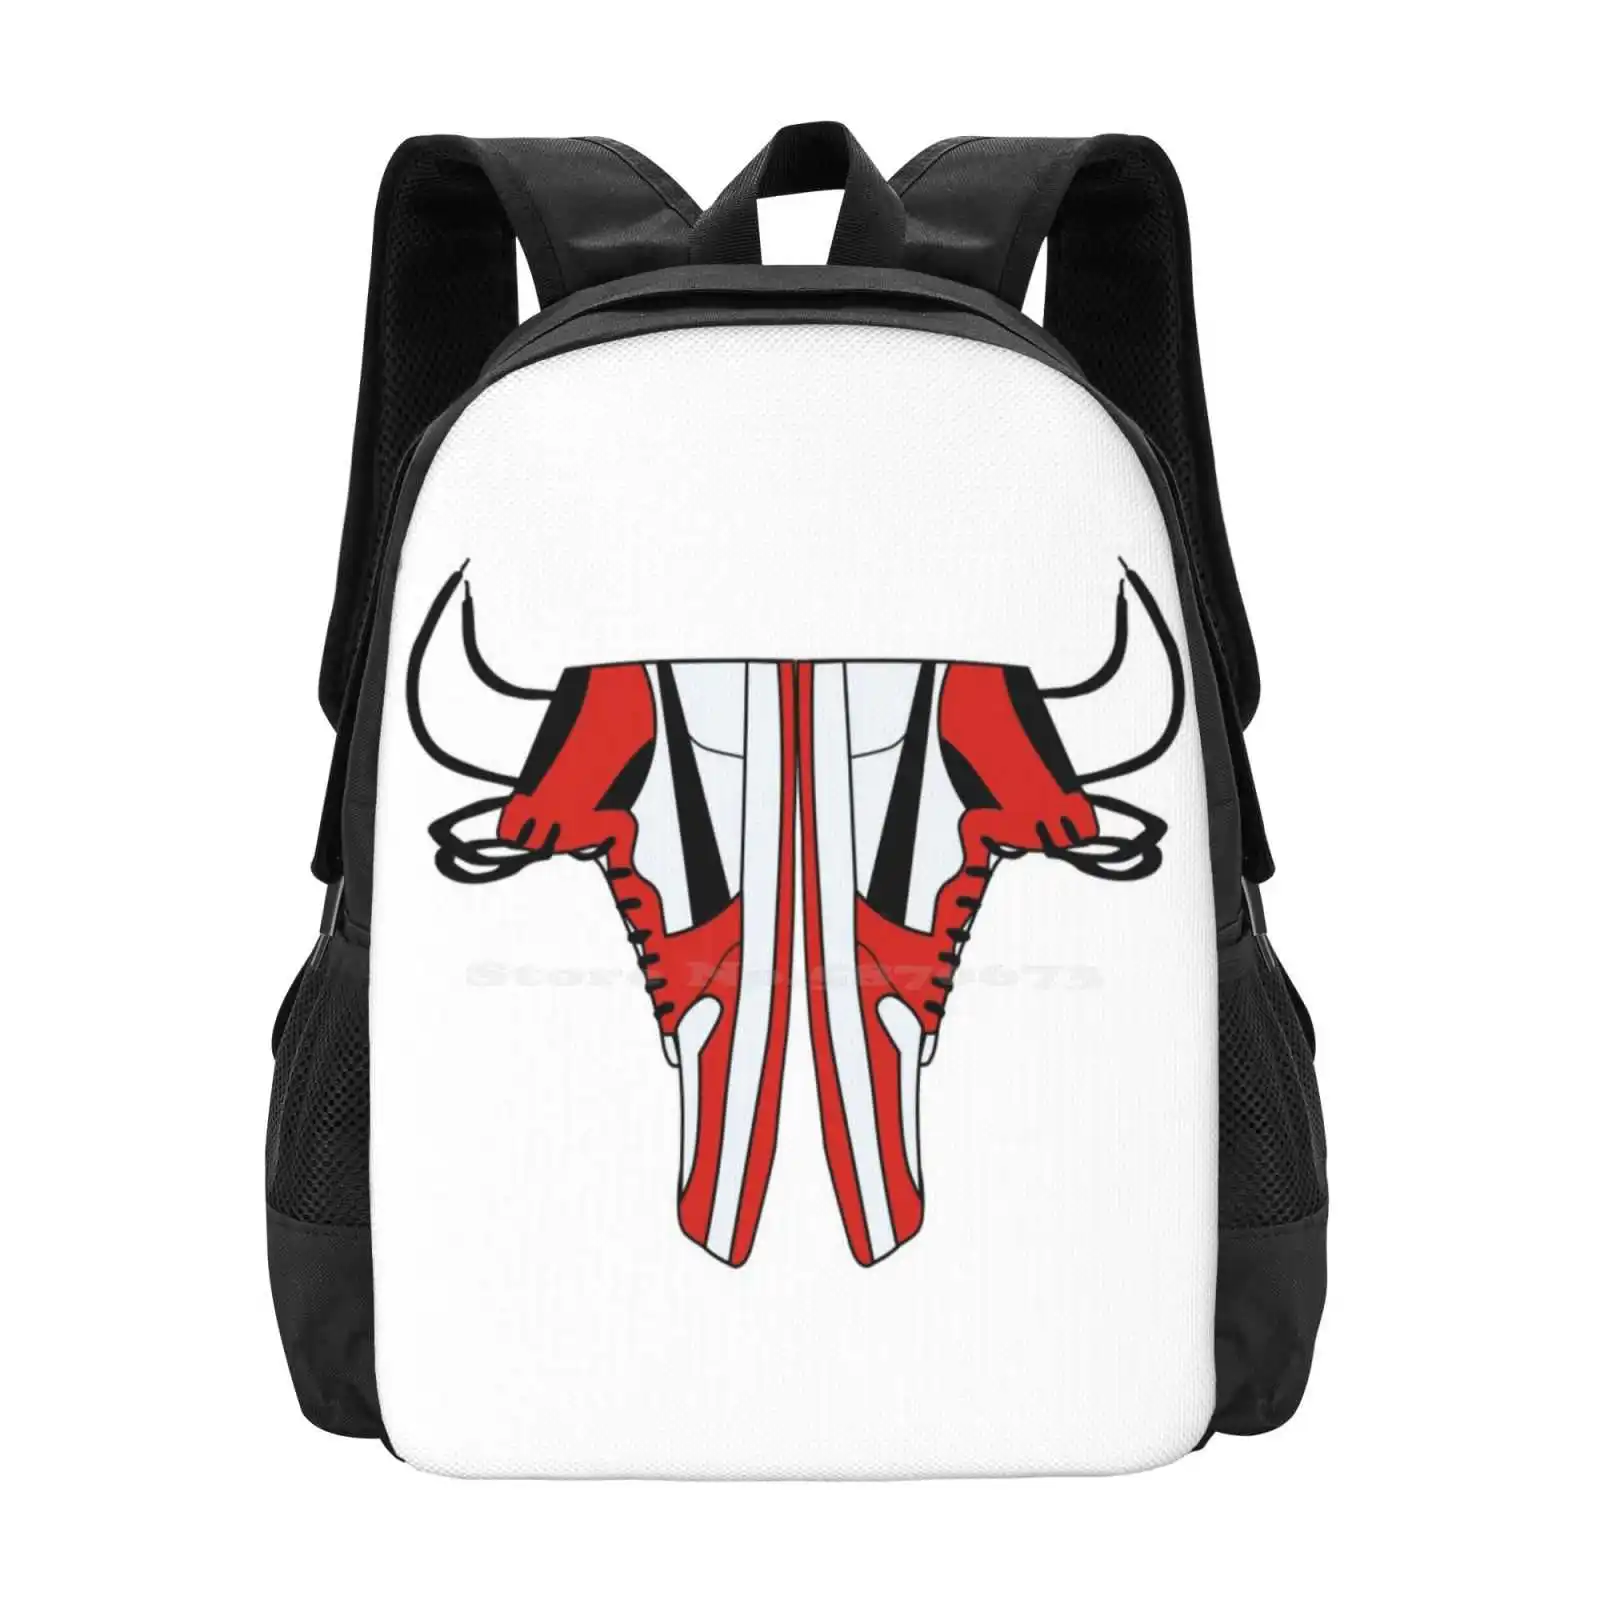 Jordan backpacks - Buy the best product with free shipping on